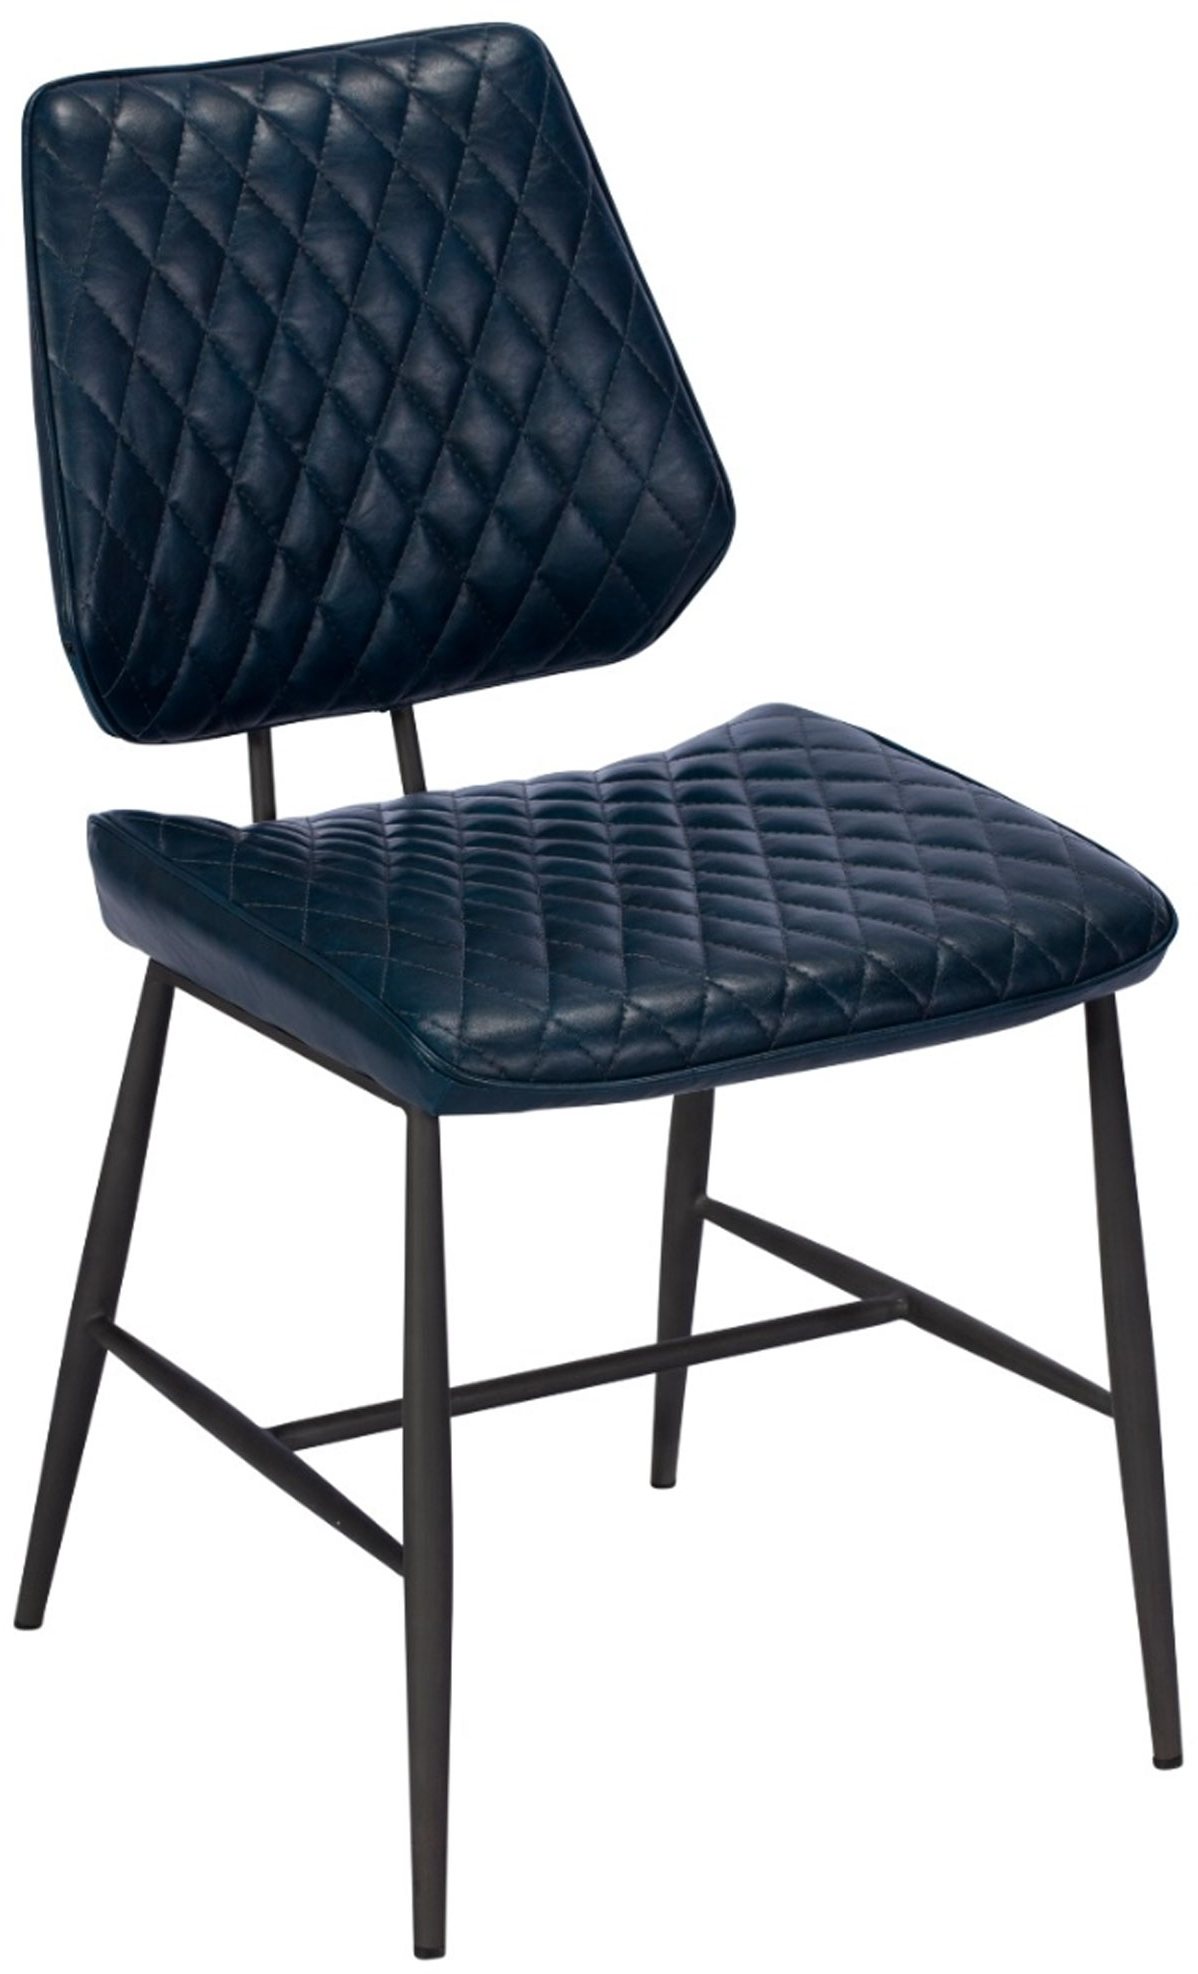 Dalton Dining Chair In Dark Blue Faux, Blue Faux Leather Dining Chairs